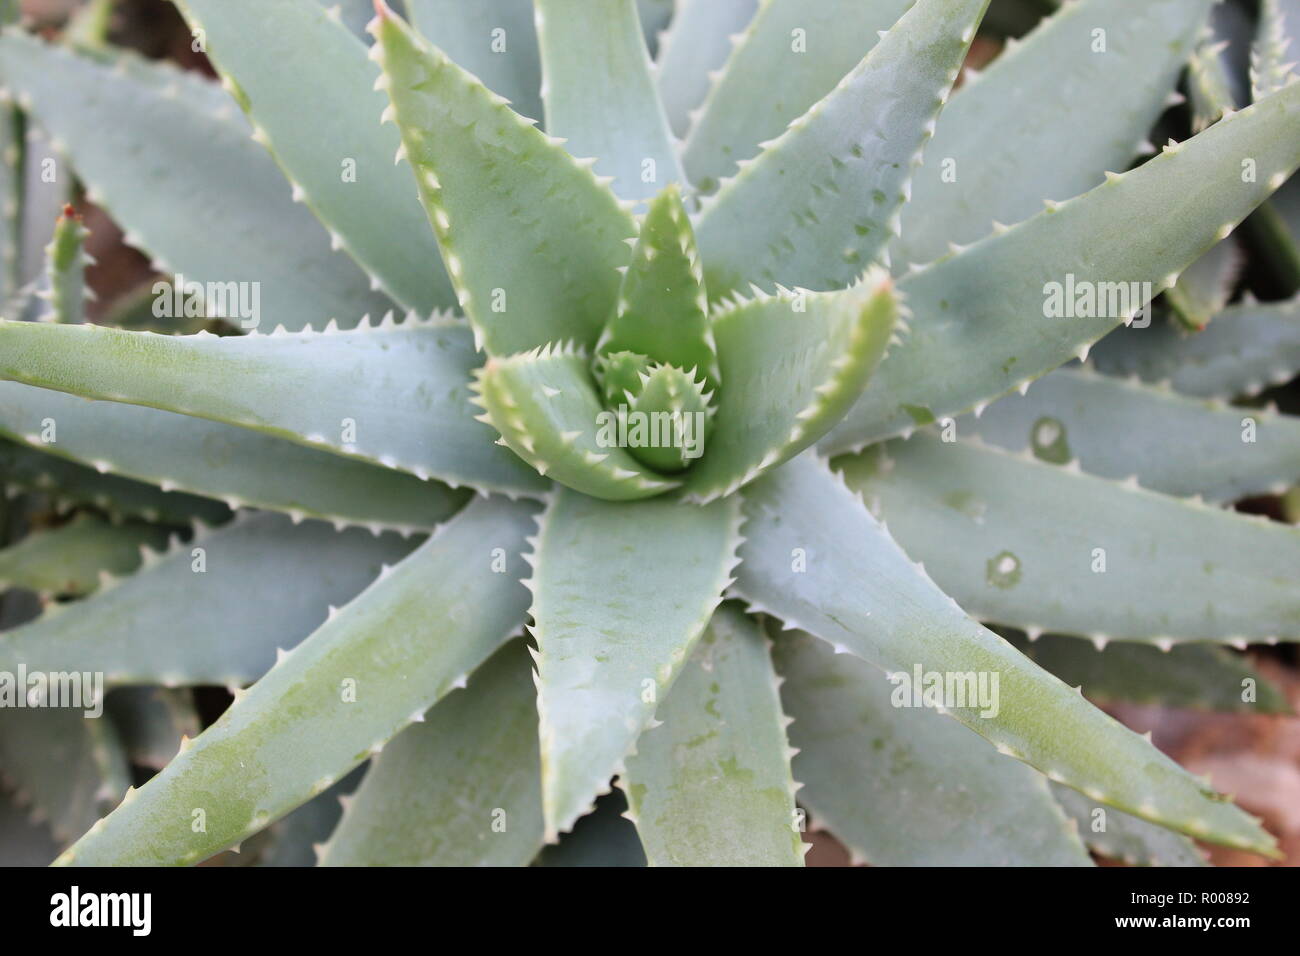 Standard And Ubiquitous Beautiful And Flawless Aloe Vera Plant